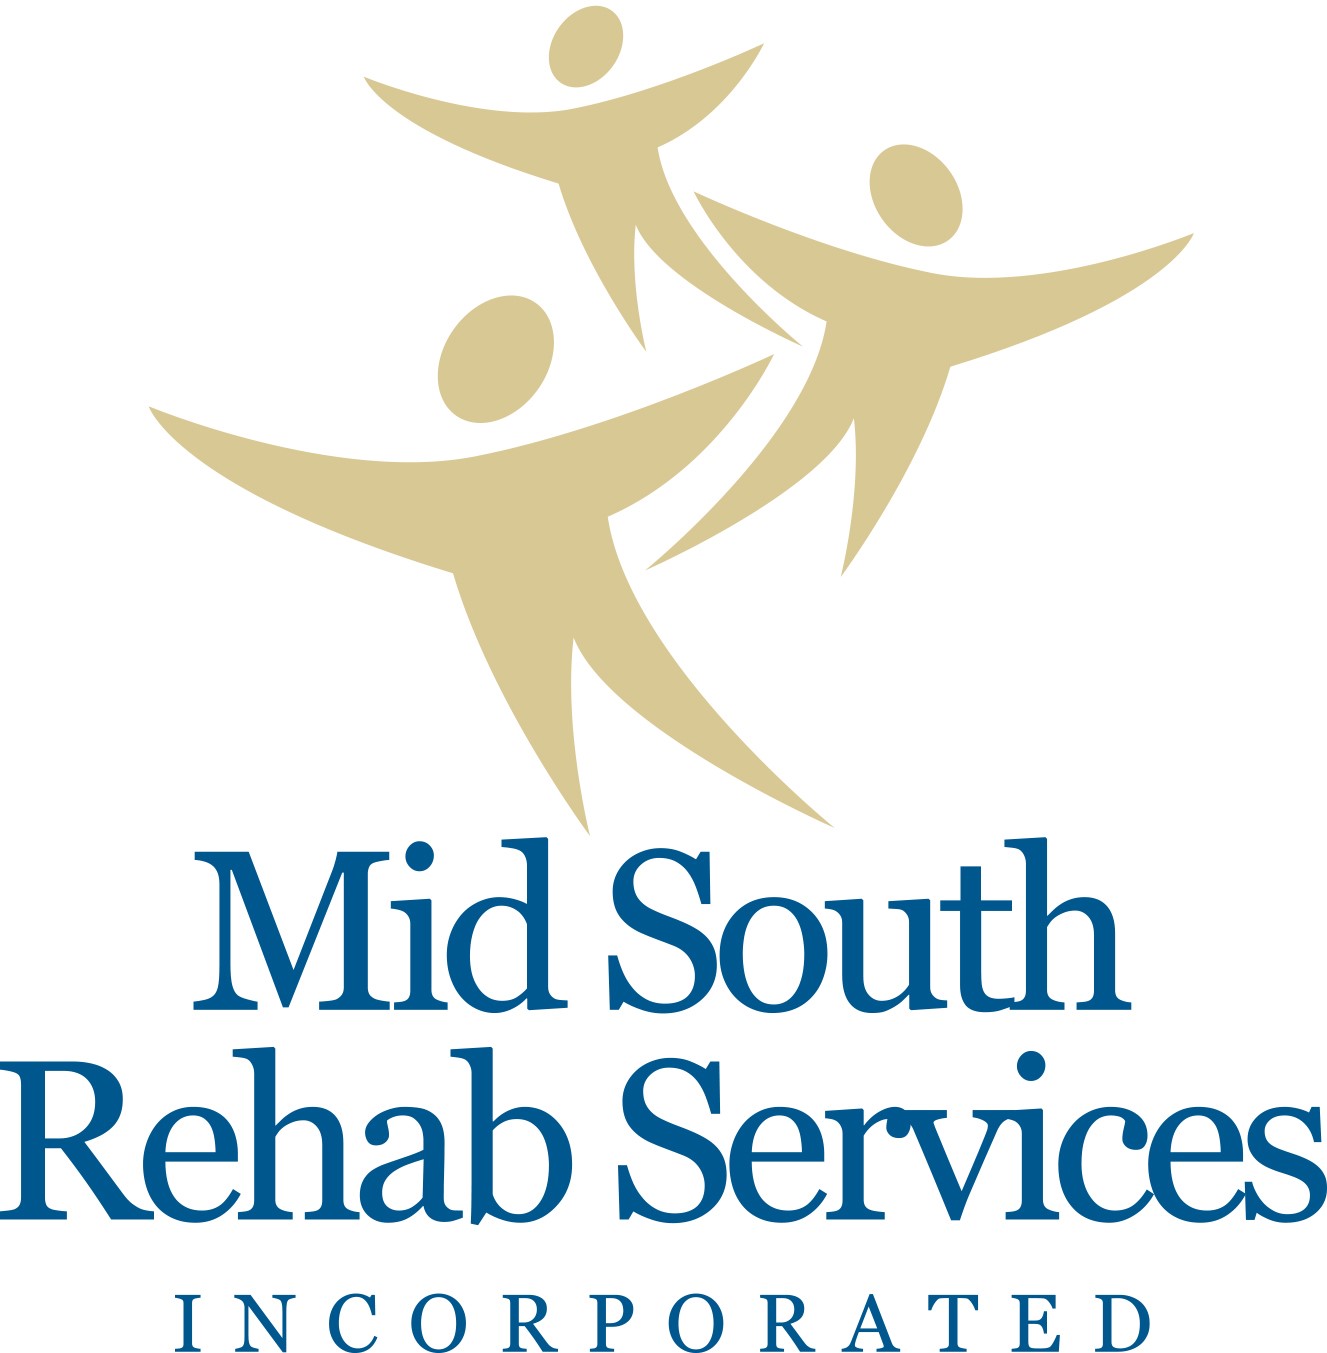 Mid South Rehab Services (Tier 2)